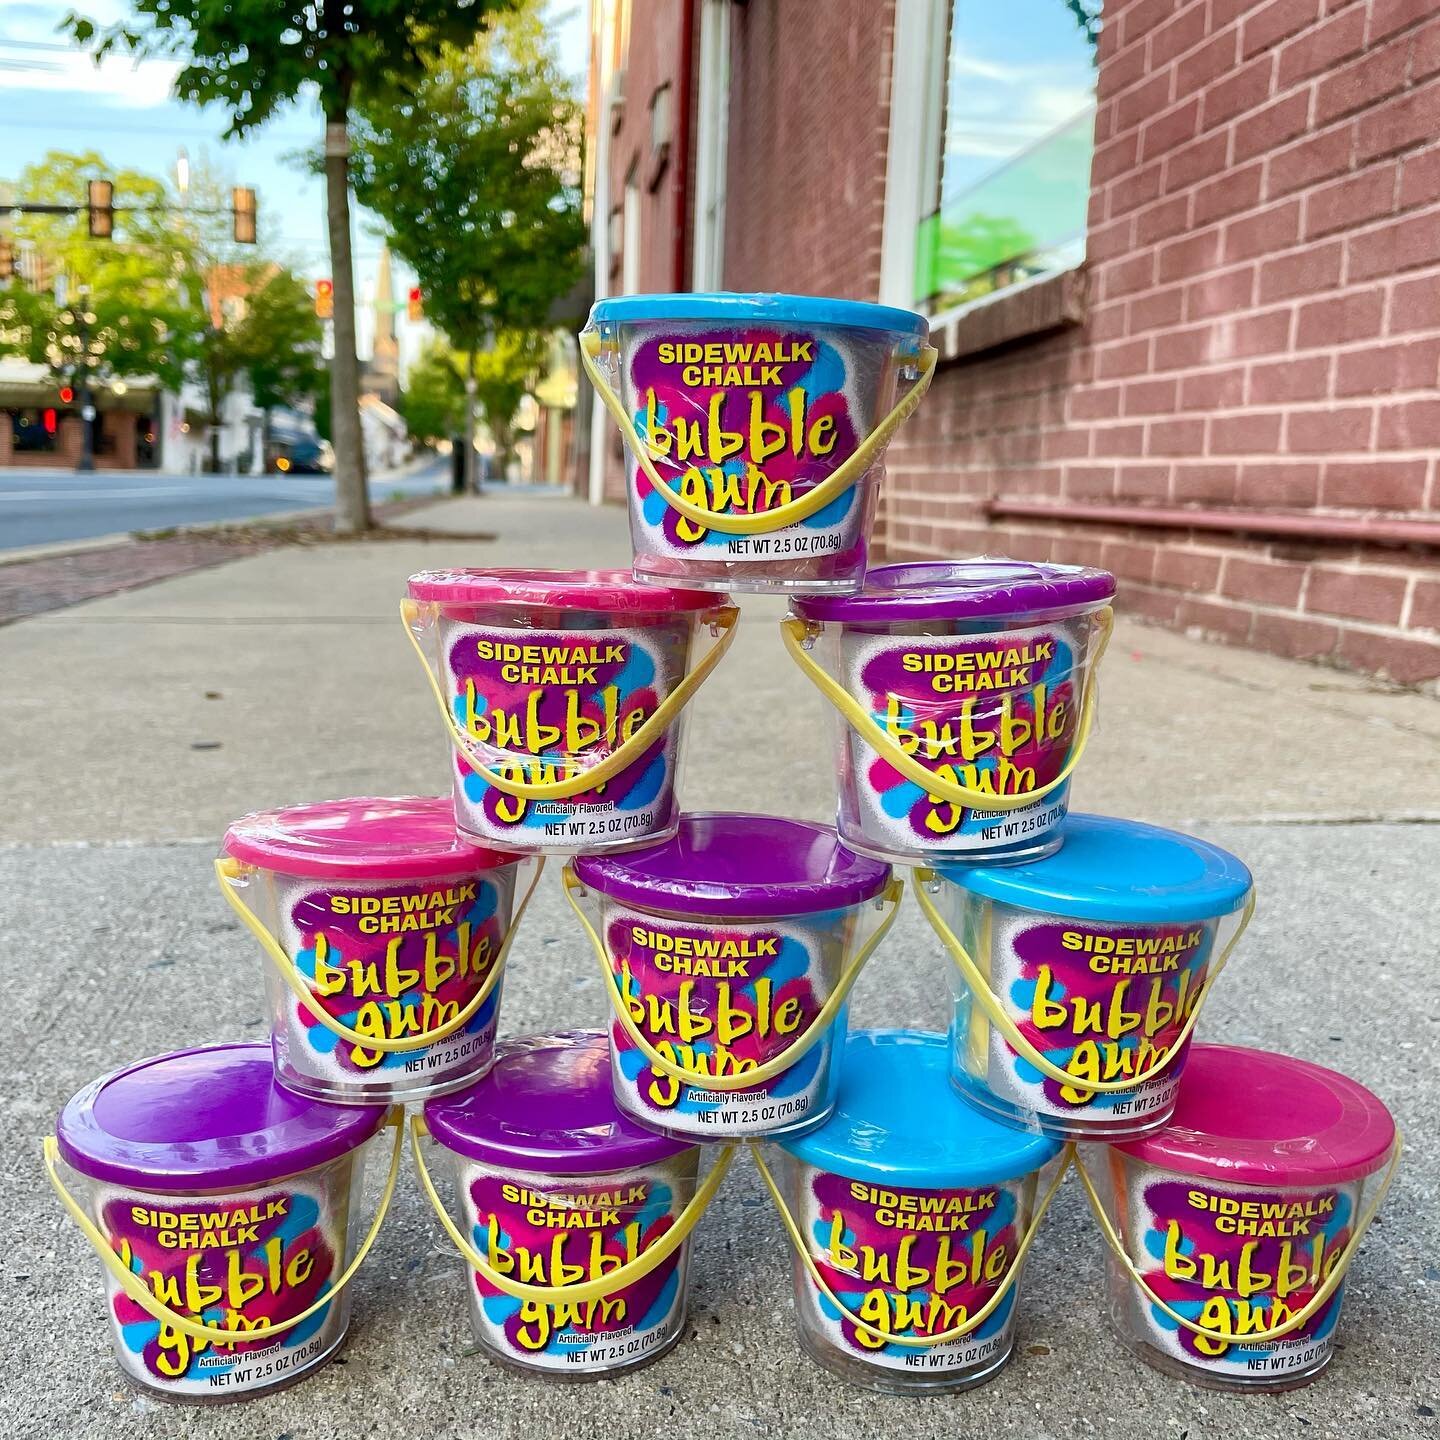 Saturday Sidewalk Vibes!!! Visit The Candy Unicornium and pick up your own Sidewalk Chalk Bubble Gum!! Then hit the Square and join in on the Chalk Art Contest!!! Candy Shoppe is Open 1:00-7:00pm Today!!!